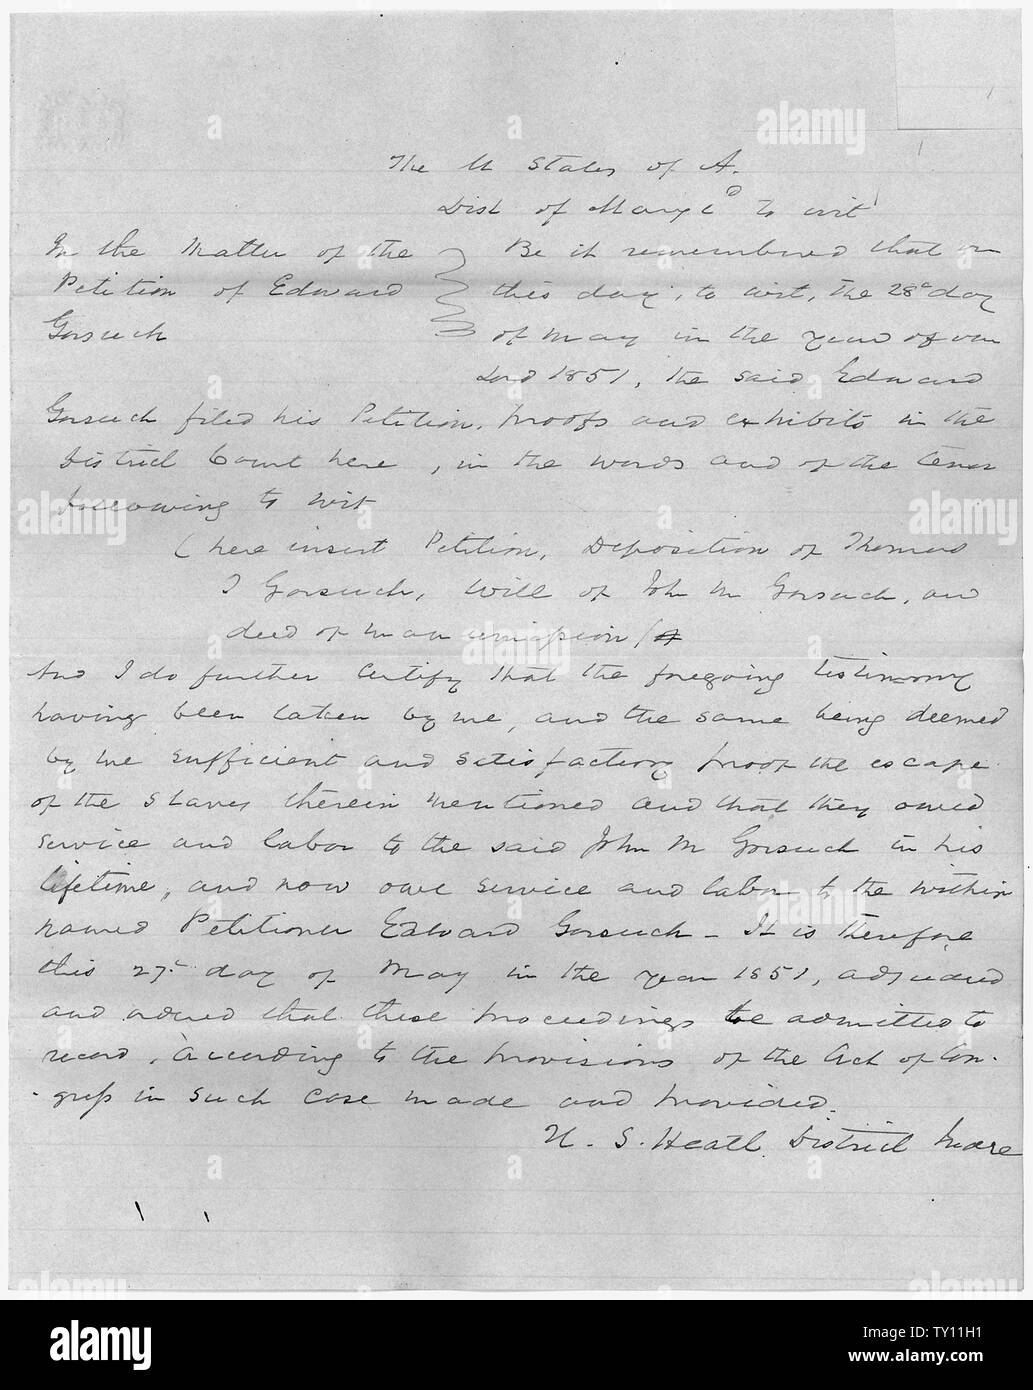 Edward Gorsuch's Original Fugitive Slave Petition and Ownership Documentation: Court Record; Scope and content:  Mr. Gorsuch requests permission of the court to seek out and recover his fugitive slaves: Noah Baley, Nelson Ford, George Hammond, Joshua Hammond, Eli Ford, and Charles Ford. The Court did grant Edward Gorsuch the right to reclaim his slaves. But upon taking this action Mr. Gorsuch lost his life and caused the so-called Christiana Riot in Lancaster County, Pennsylvania. Some say this event foretold the onset of the Civil War. The accounts of the incident state that more than a hundr Stock Photo